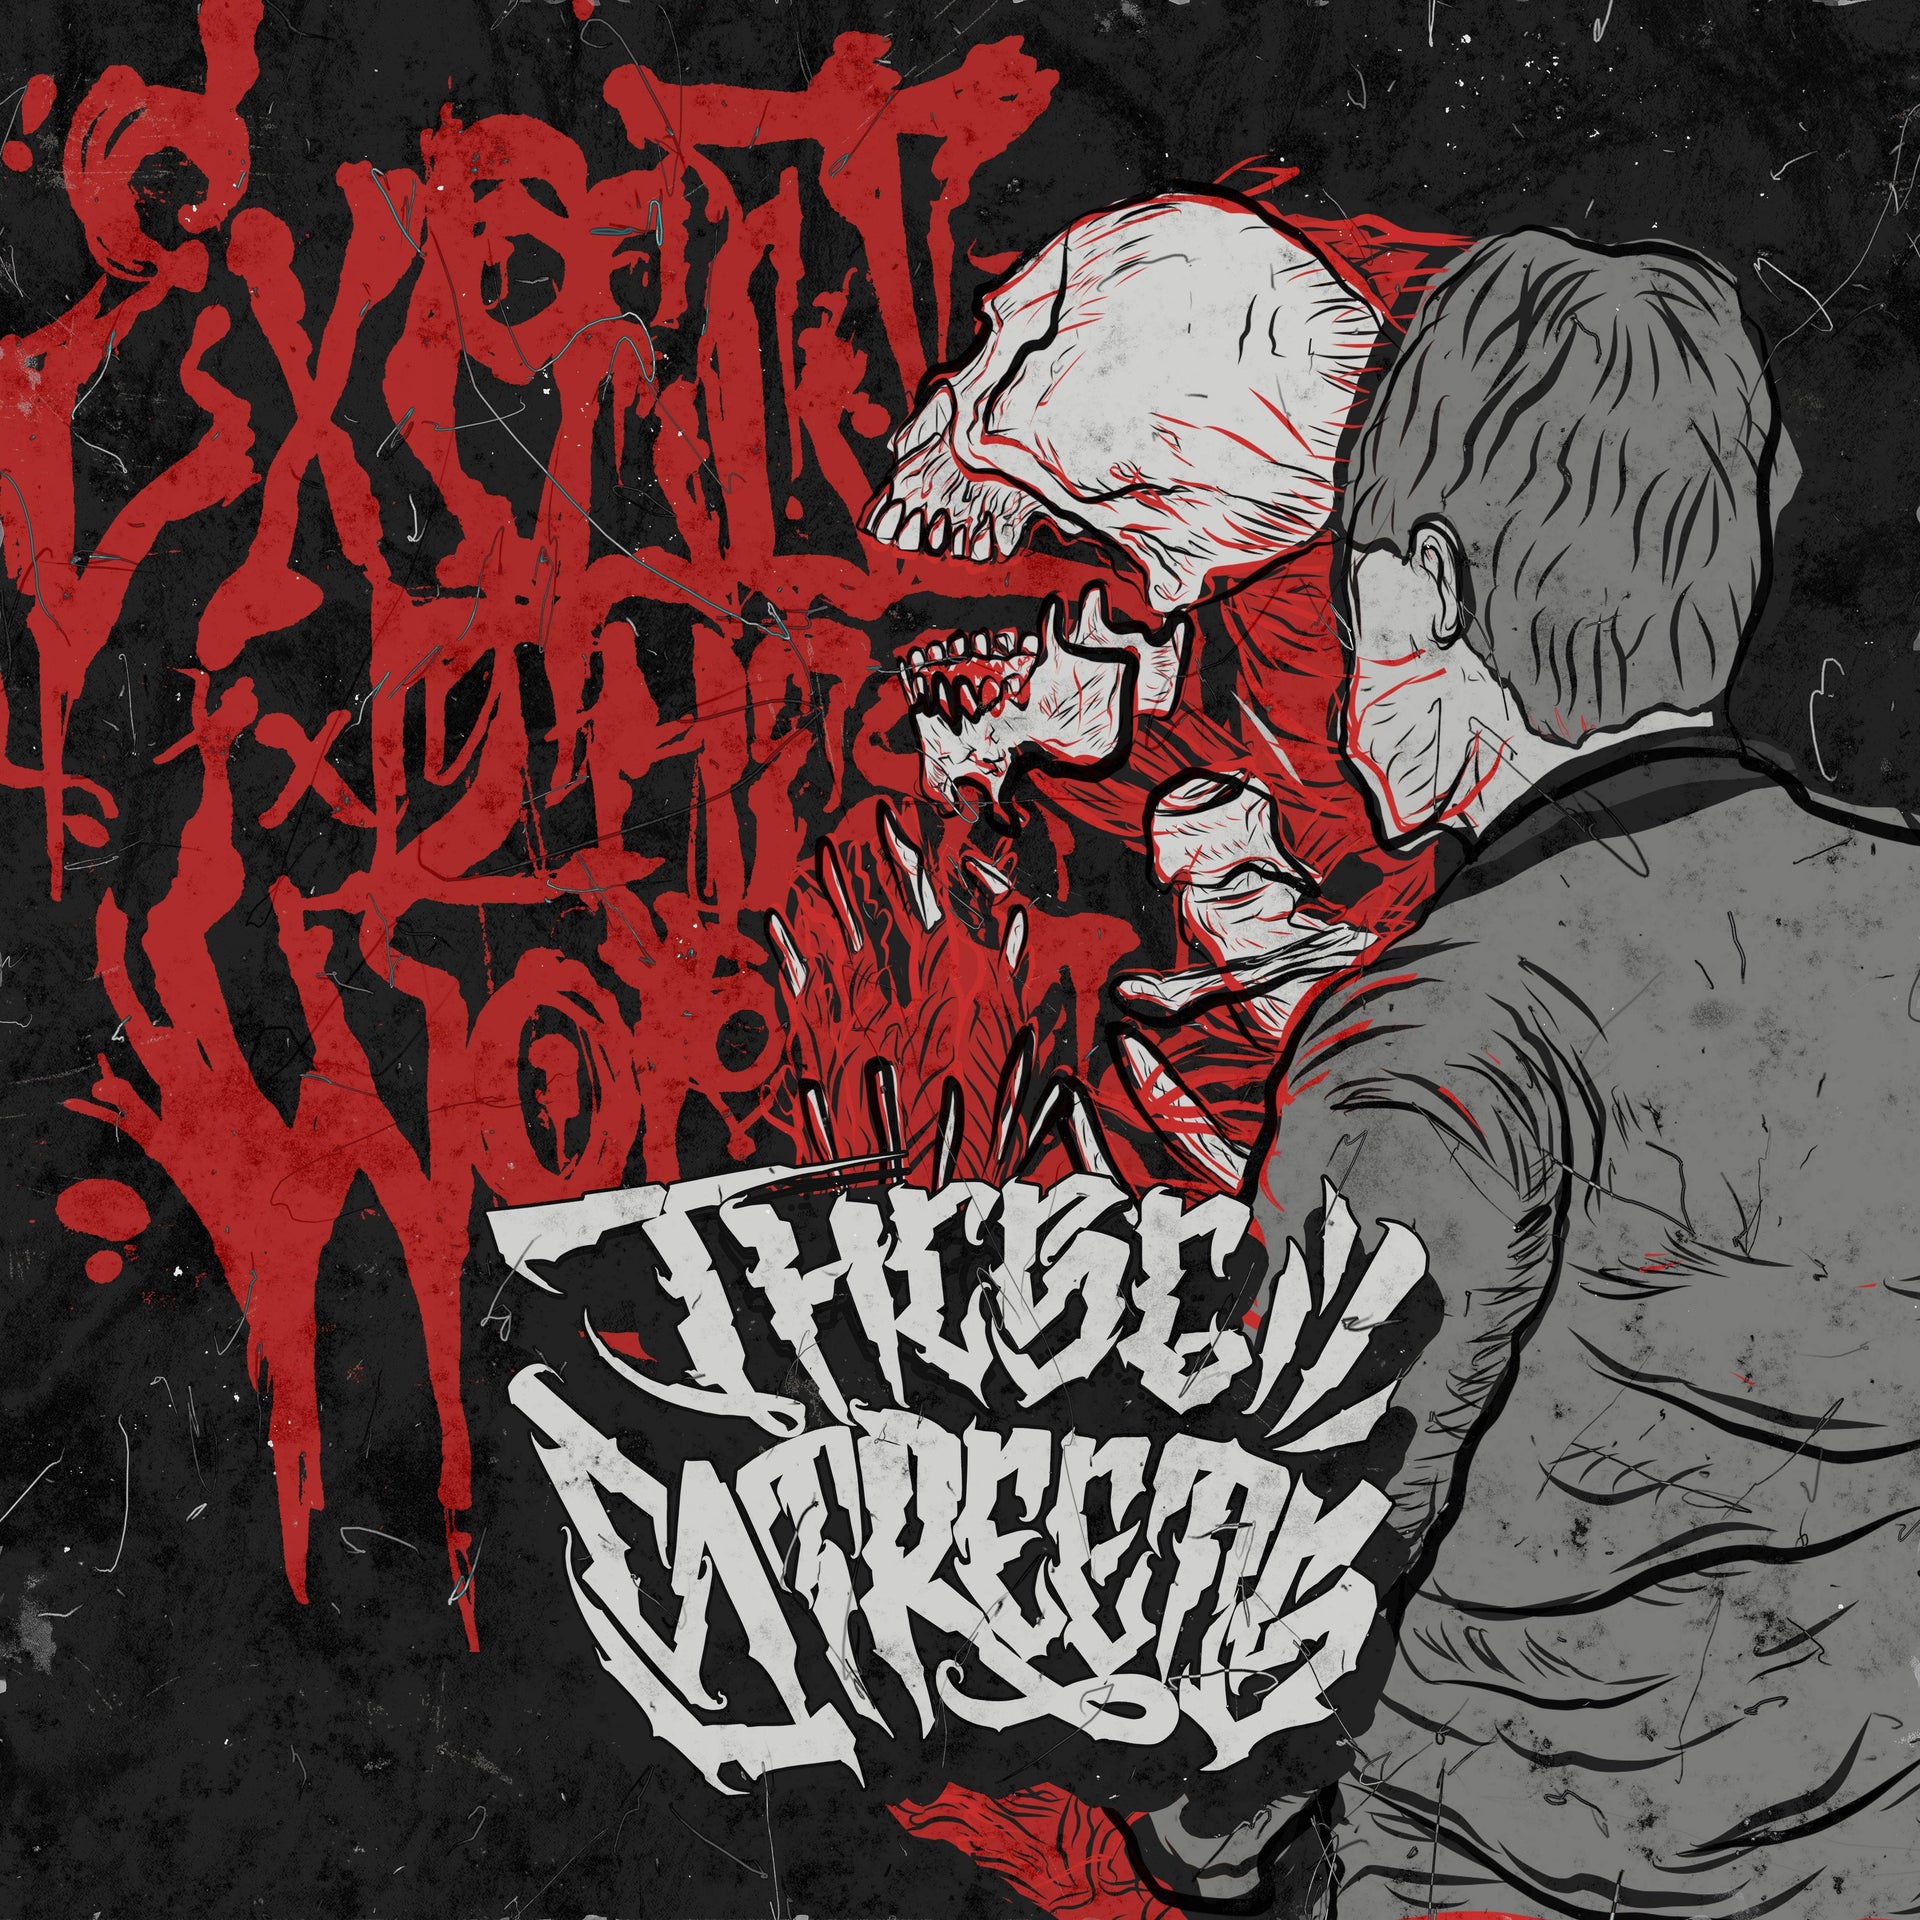 Buy – These Streets "Expect the Worst" CD – Band & Music Merch – Cold Cuts Merch